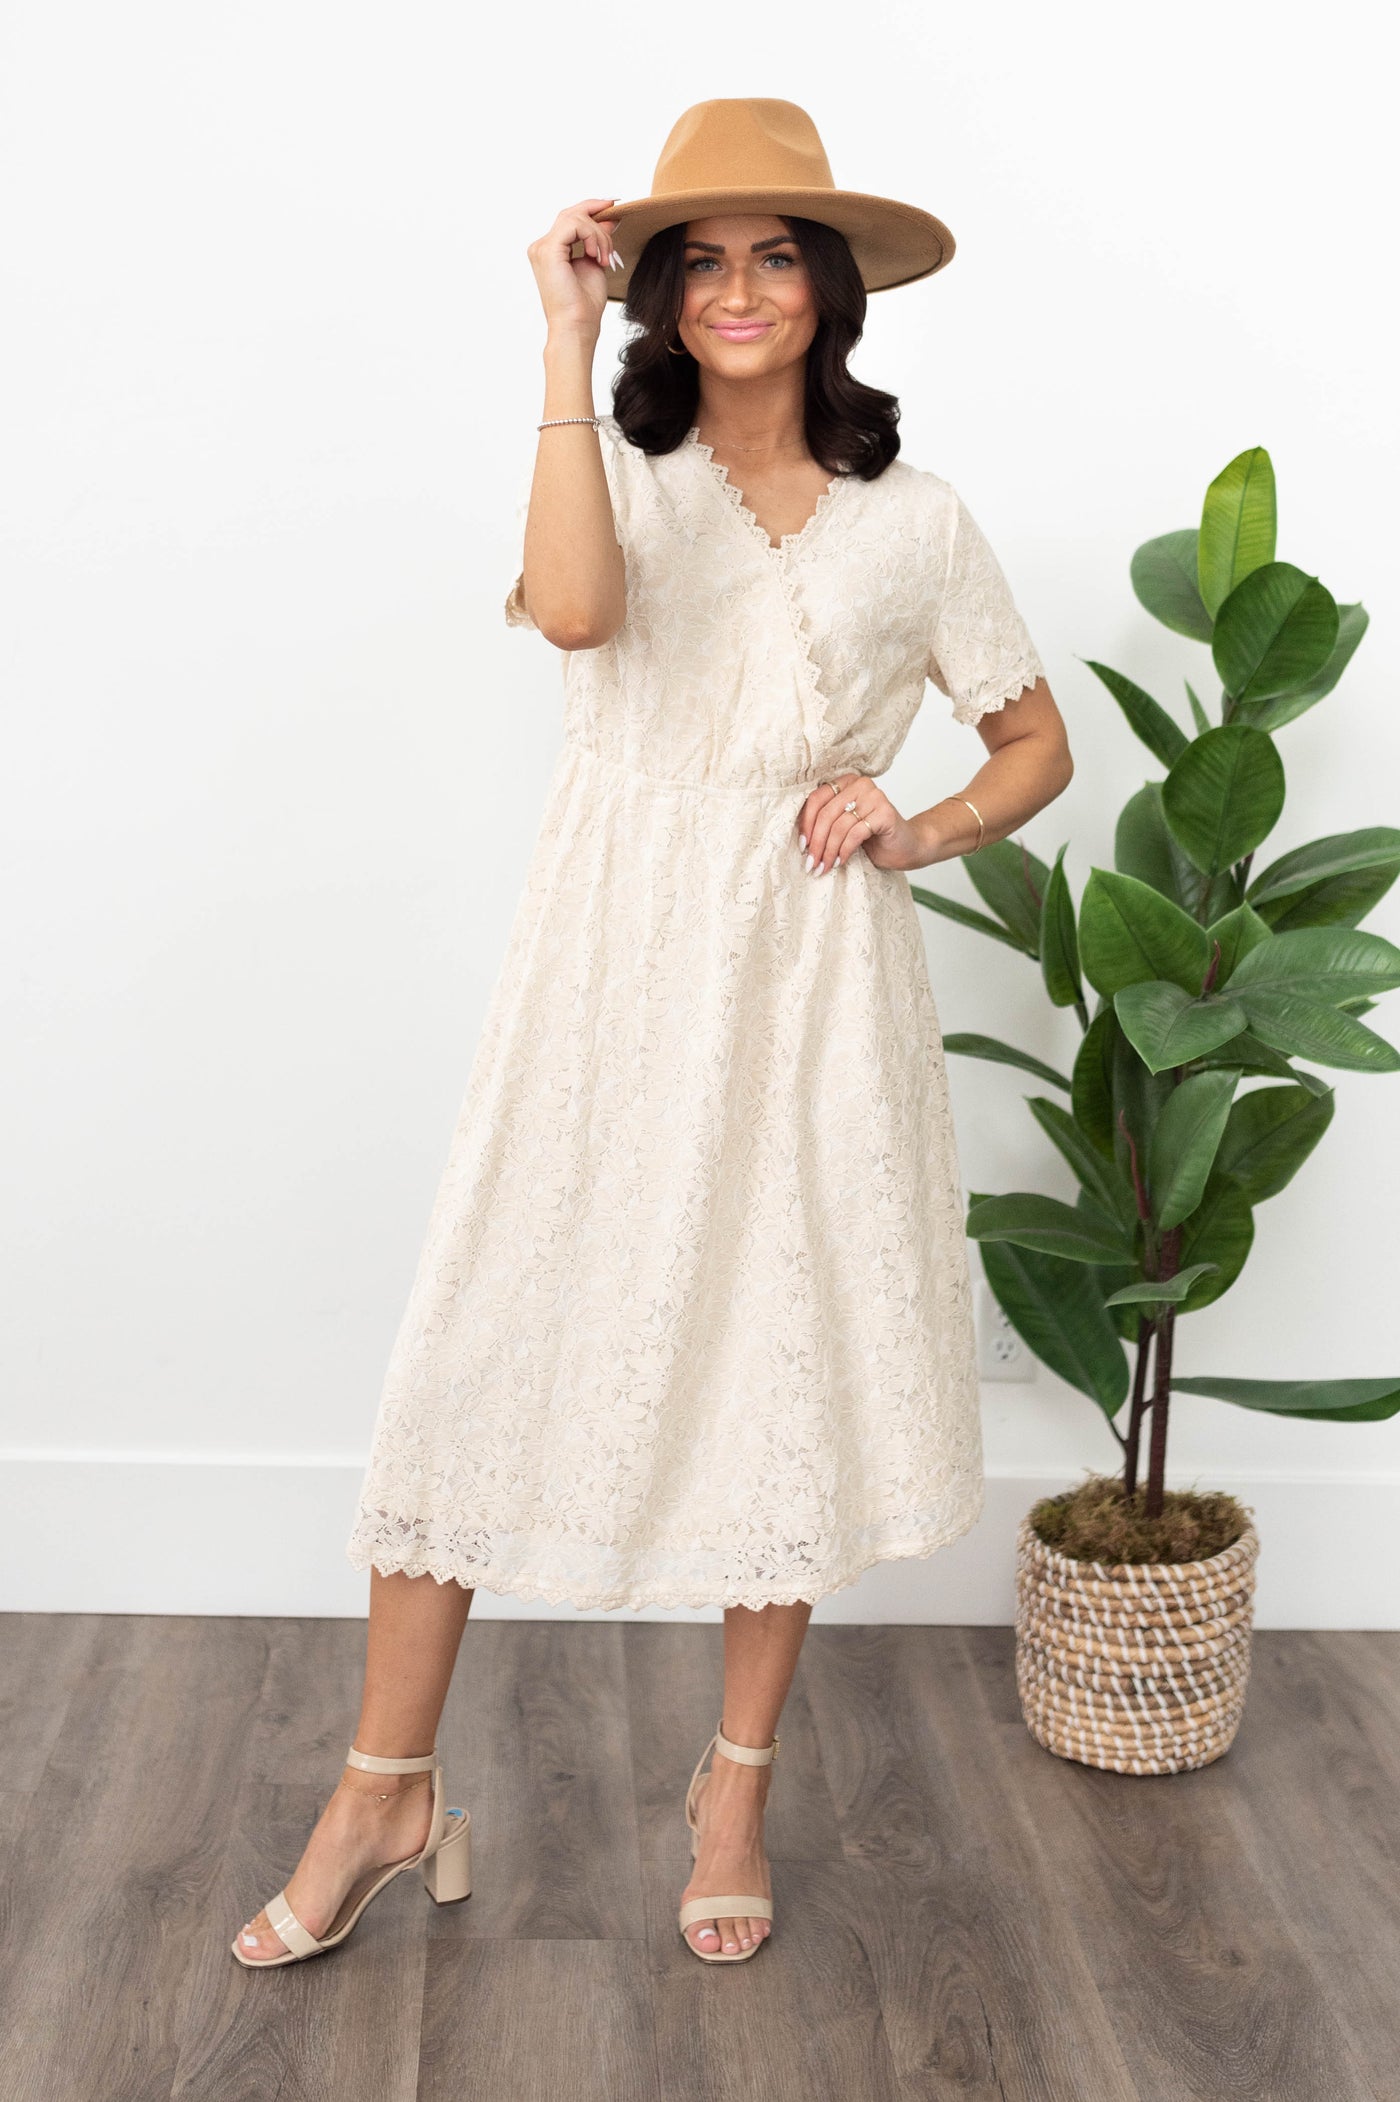 Cream lace dress with lace trim on hem and cuffs of the short sleeves